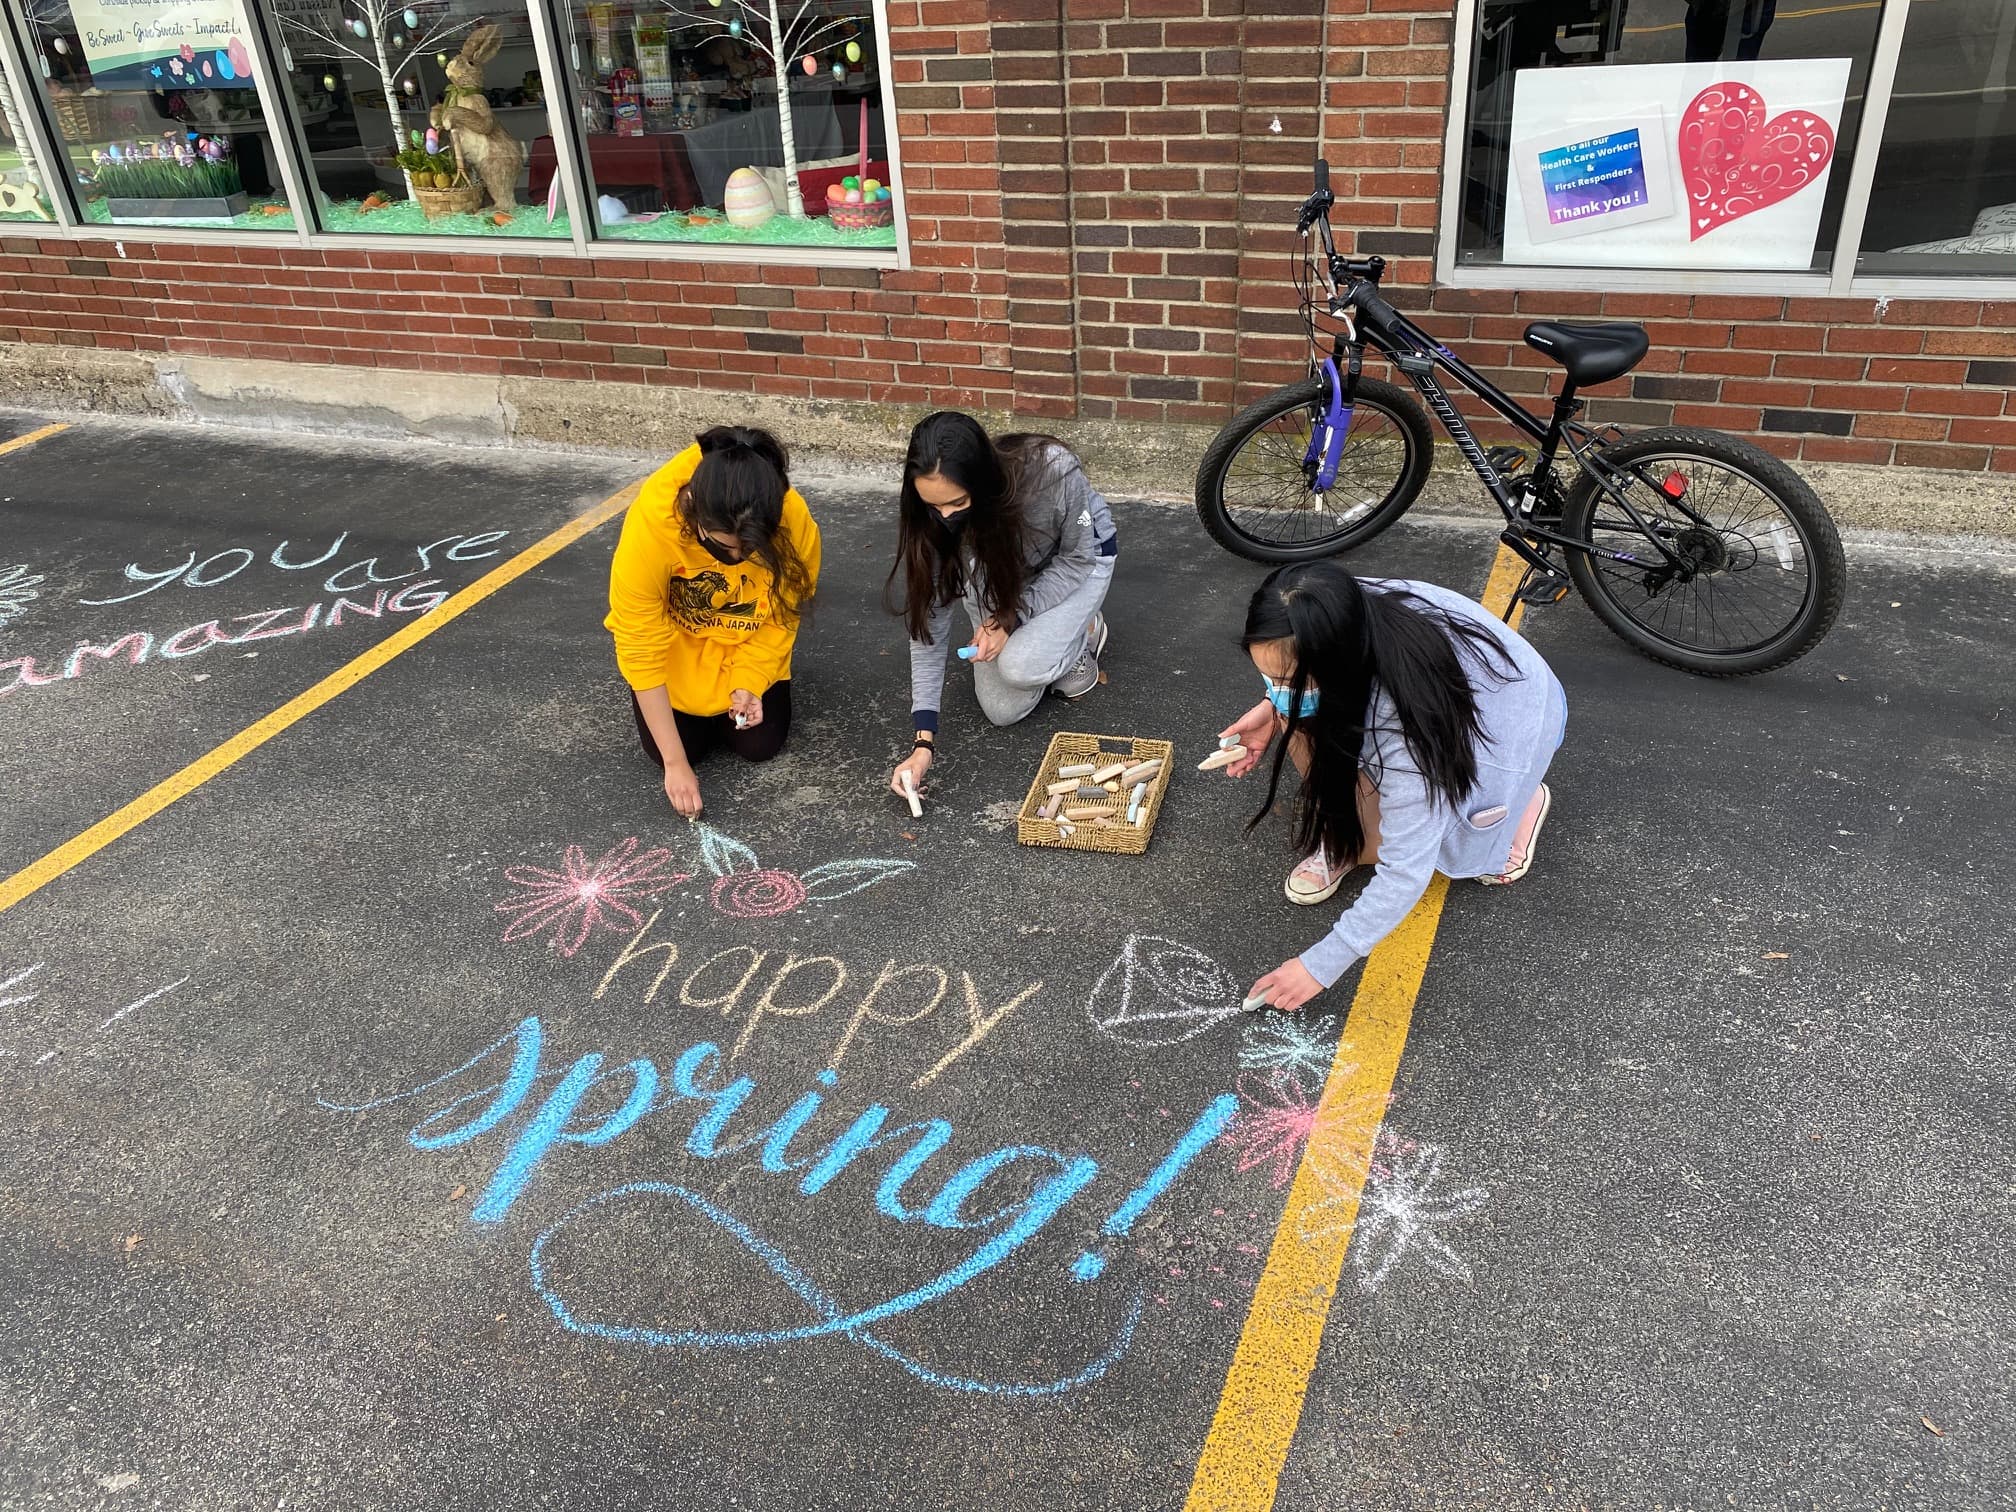 Chalk drawings mark Westborough’s annual ‘kindness week’